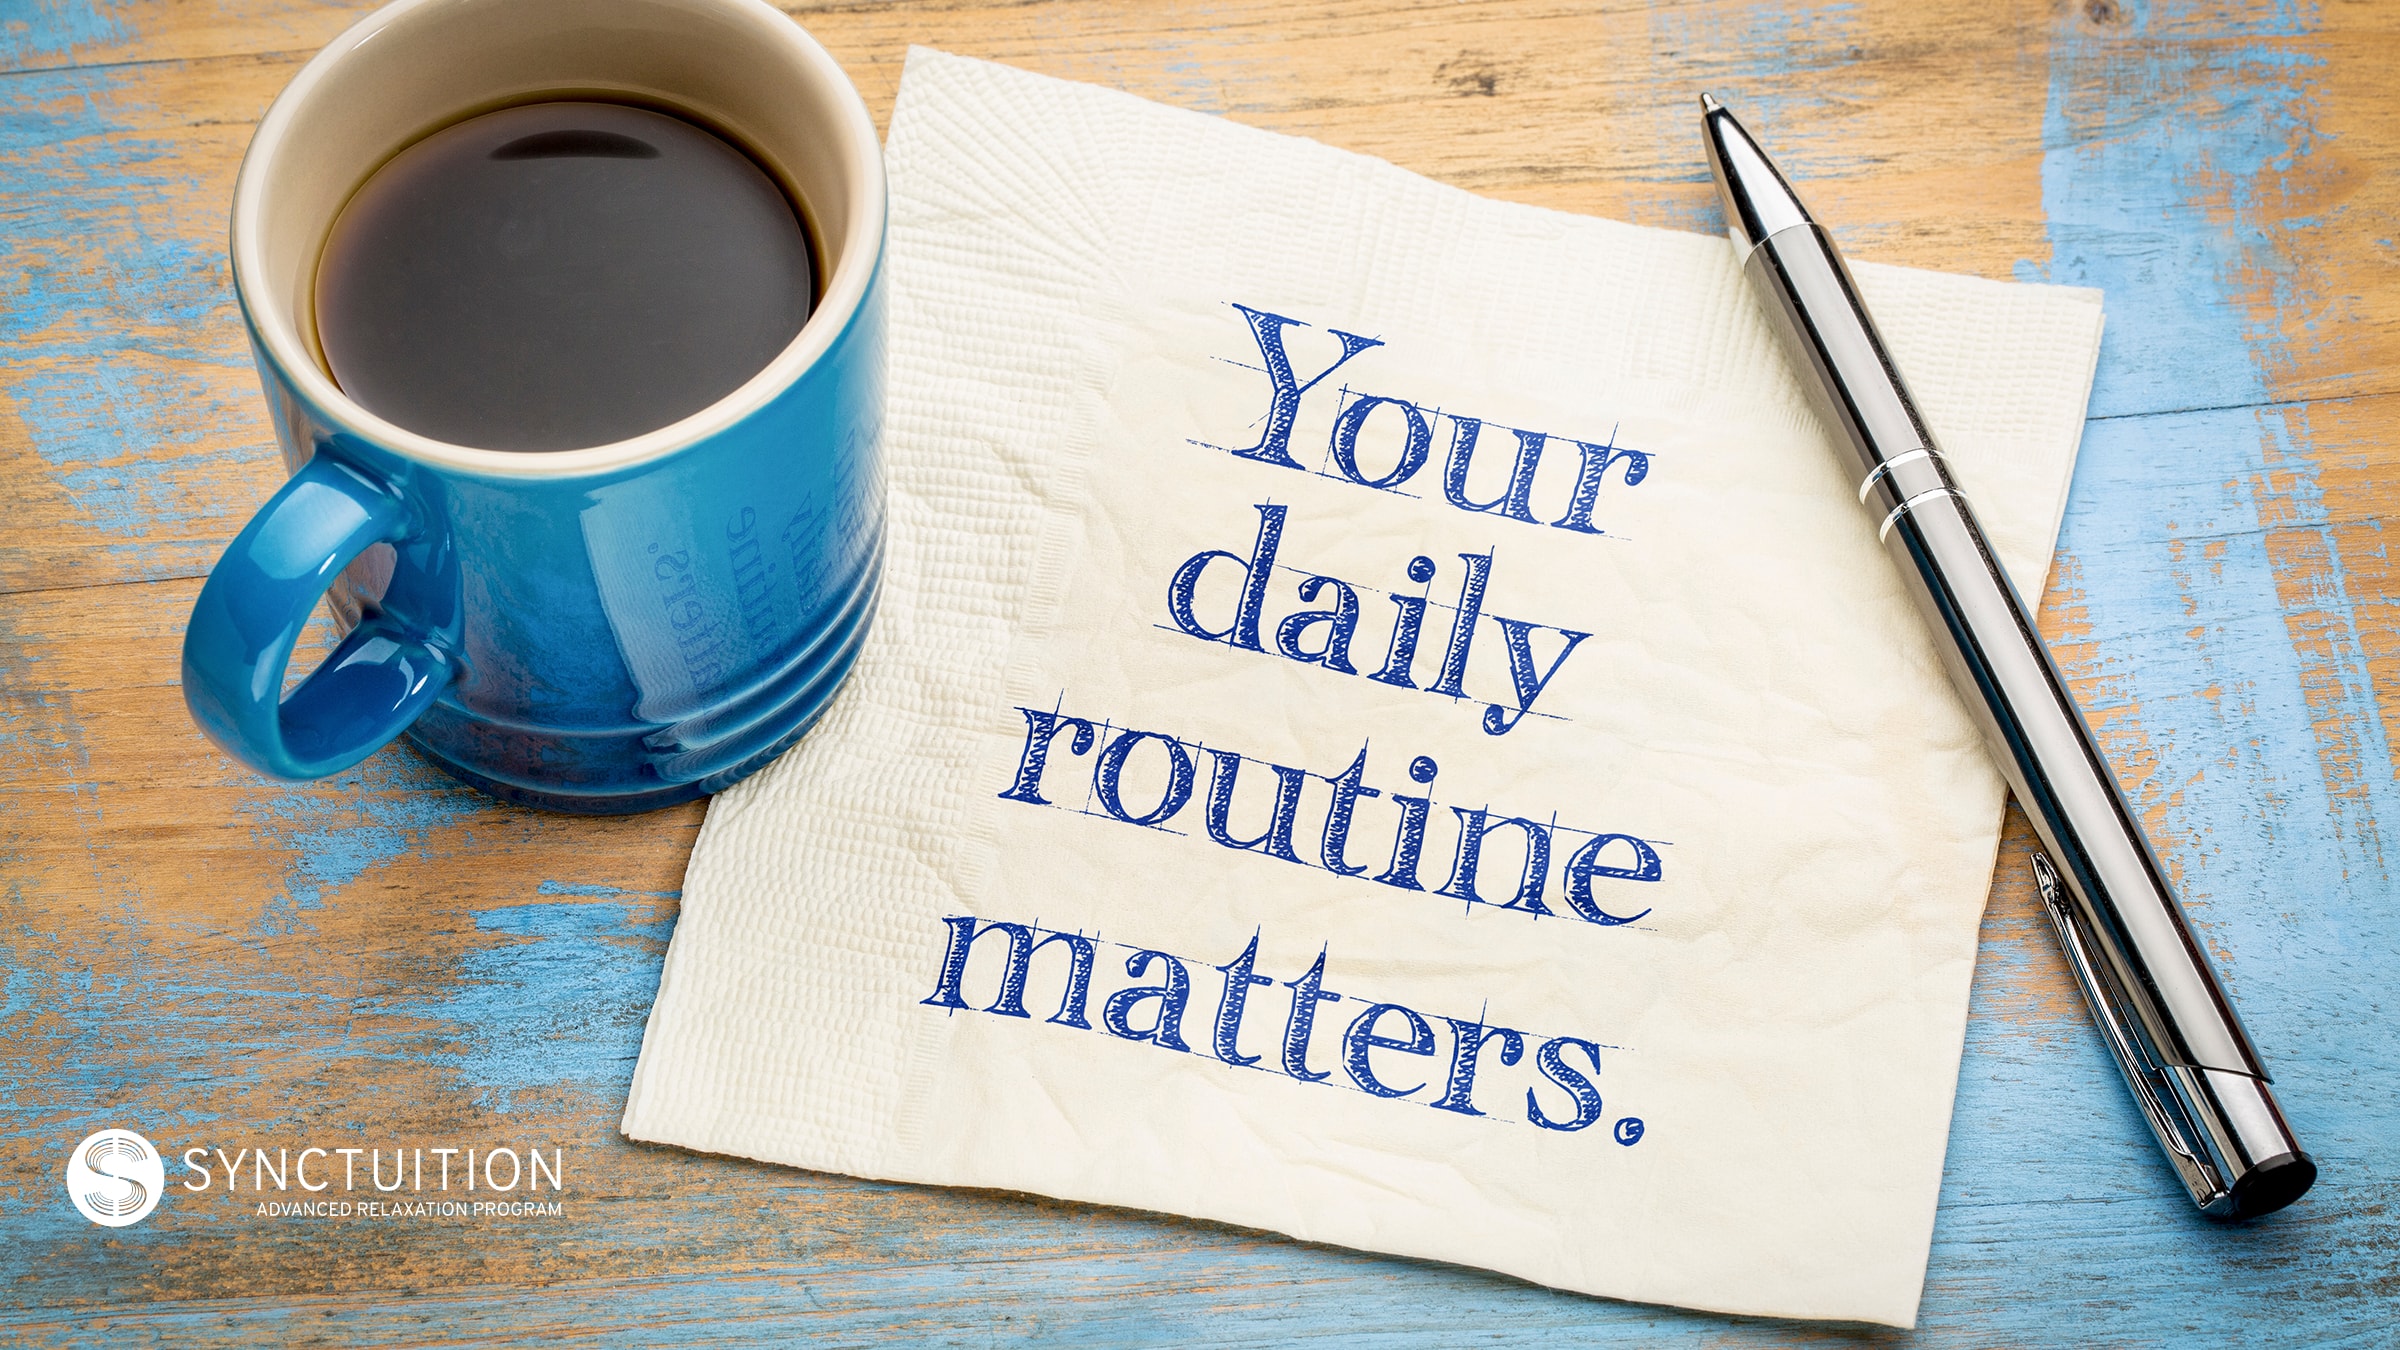 When it comes to remote work, your daily routine matters!